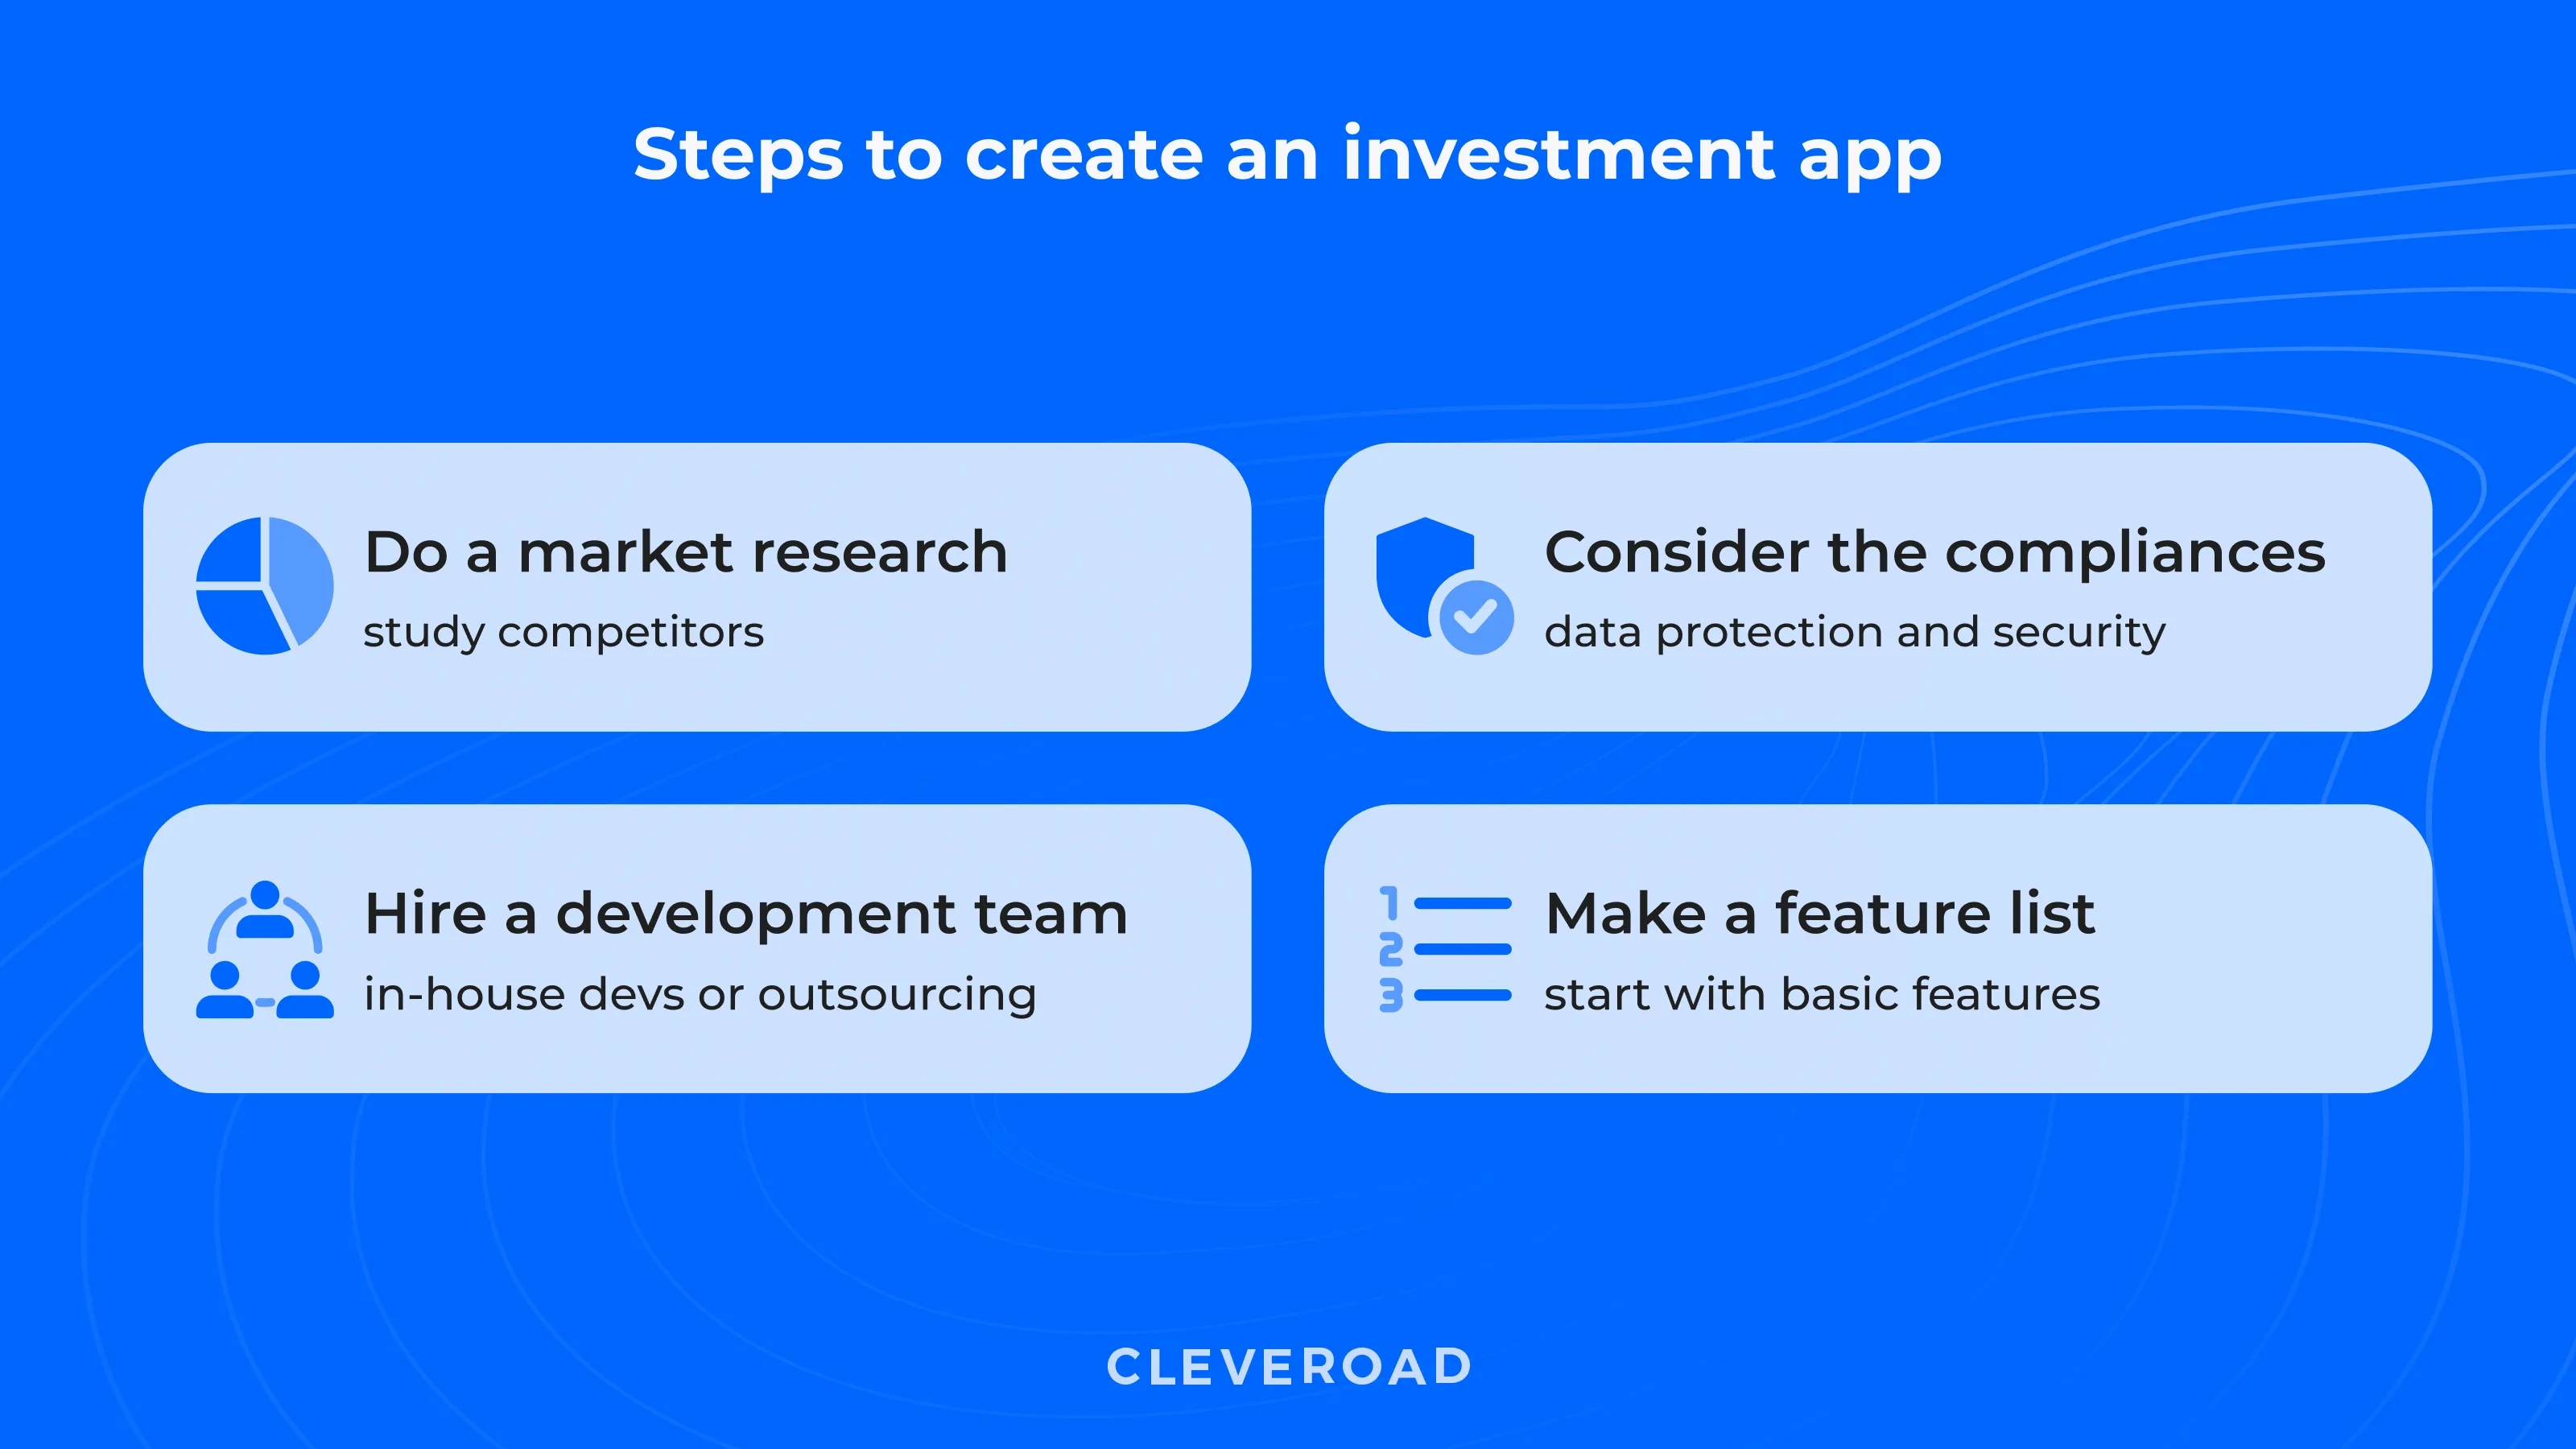 How to create an investment app